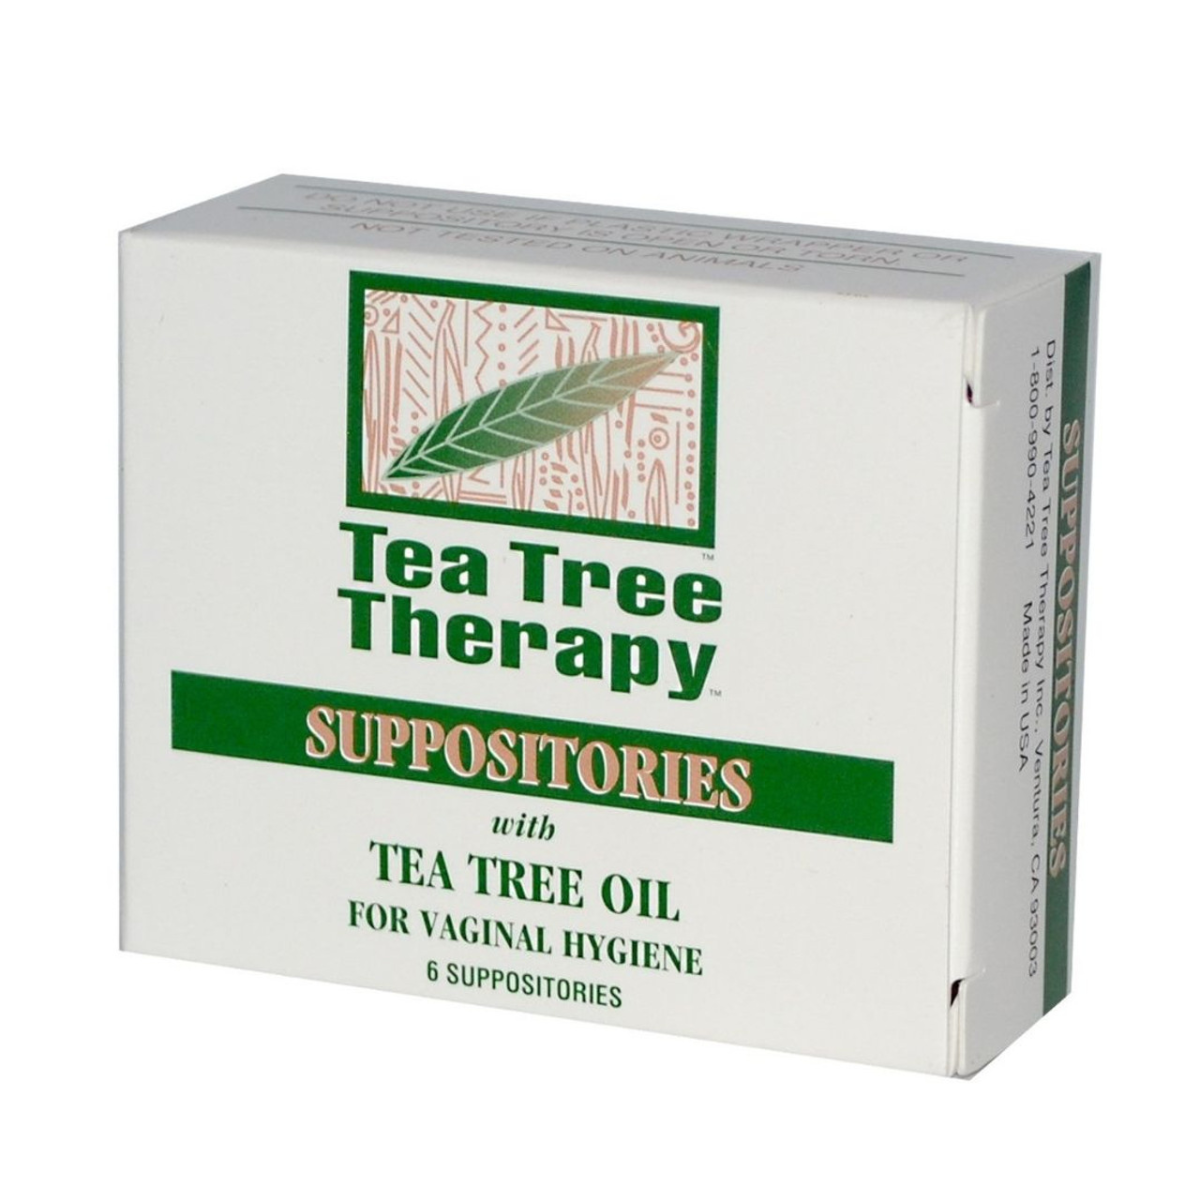 Suppositories with Tea Tree Oil